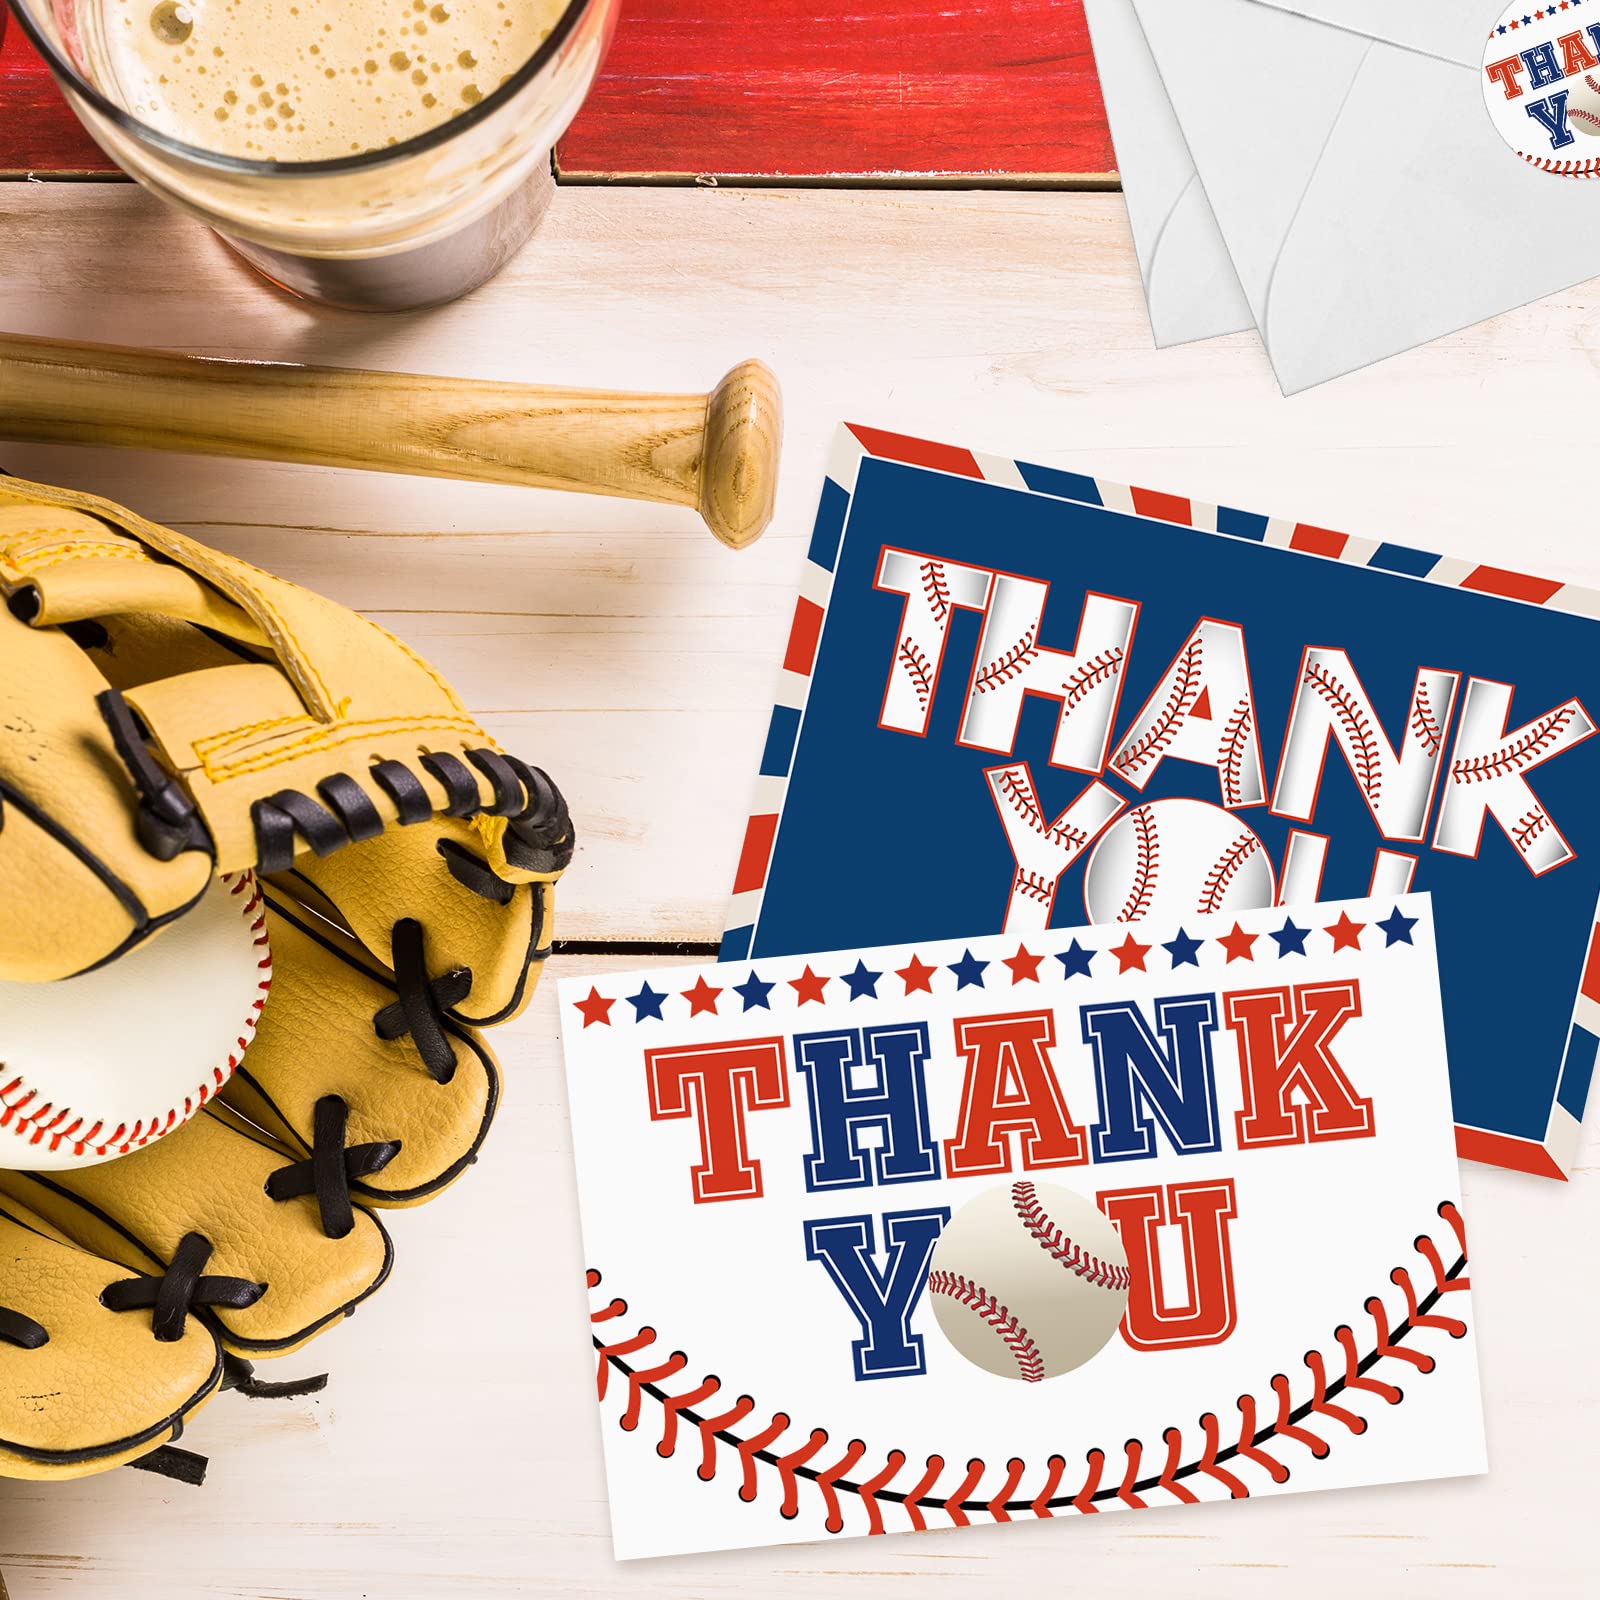 AnyDesign 32 Pack Baseball Thank You Cards with Envelopes Stickers 4 Design Baseball Blank Note Cards Thank You Couch Cards for Birthday Baseball Season Games Supplies, 4 x 6 Inch